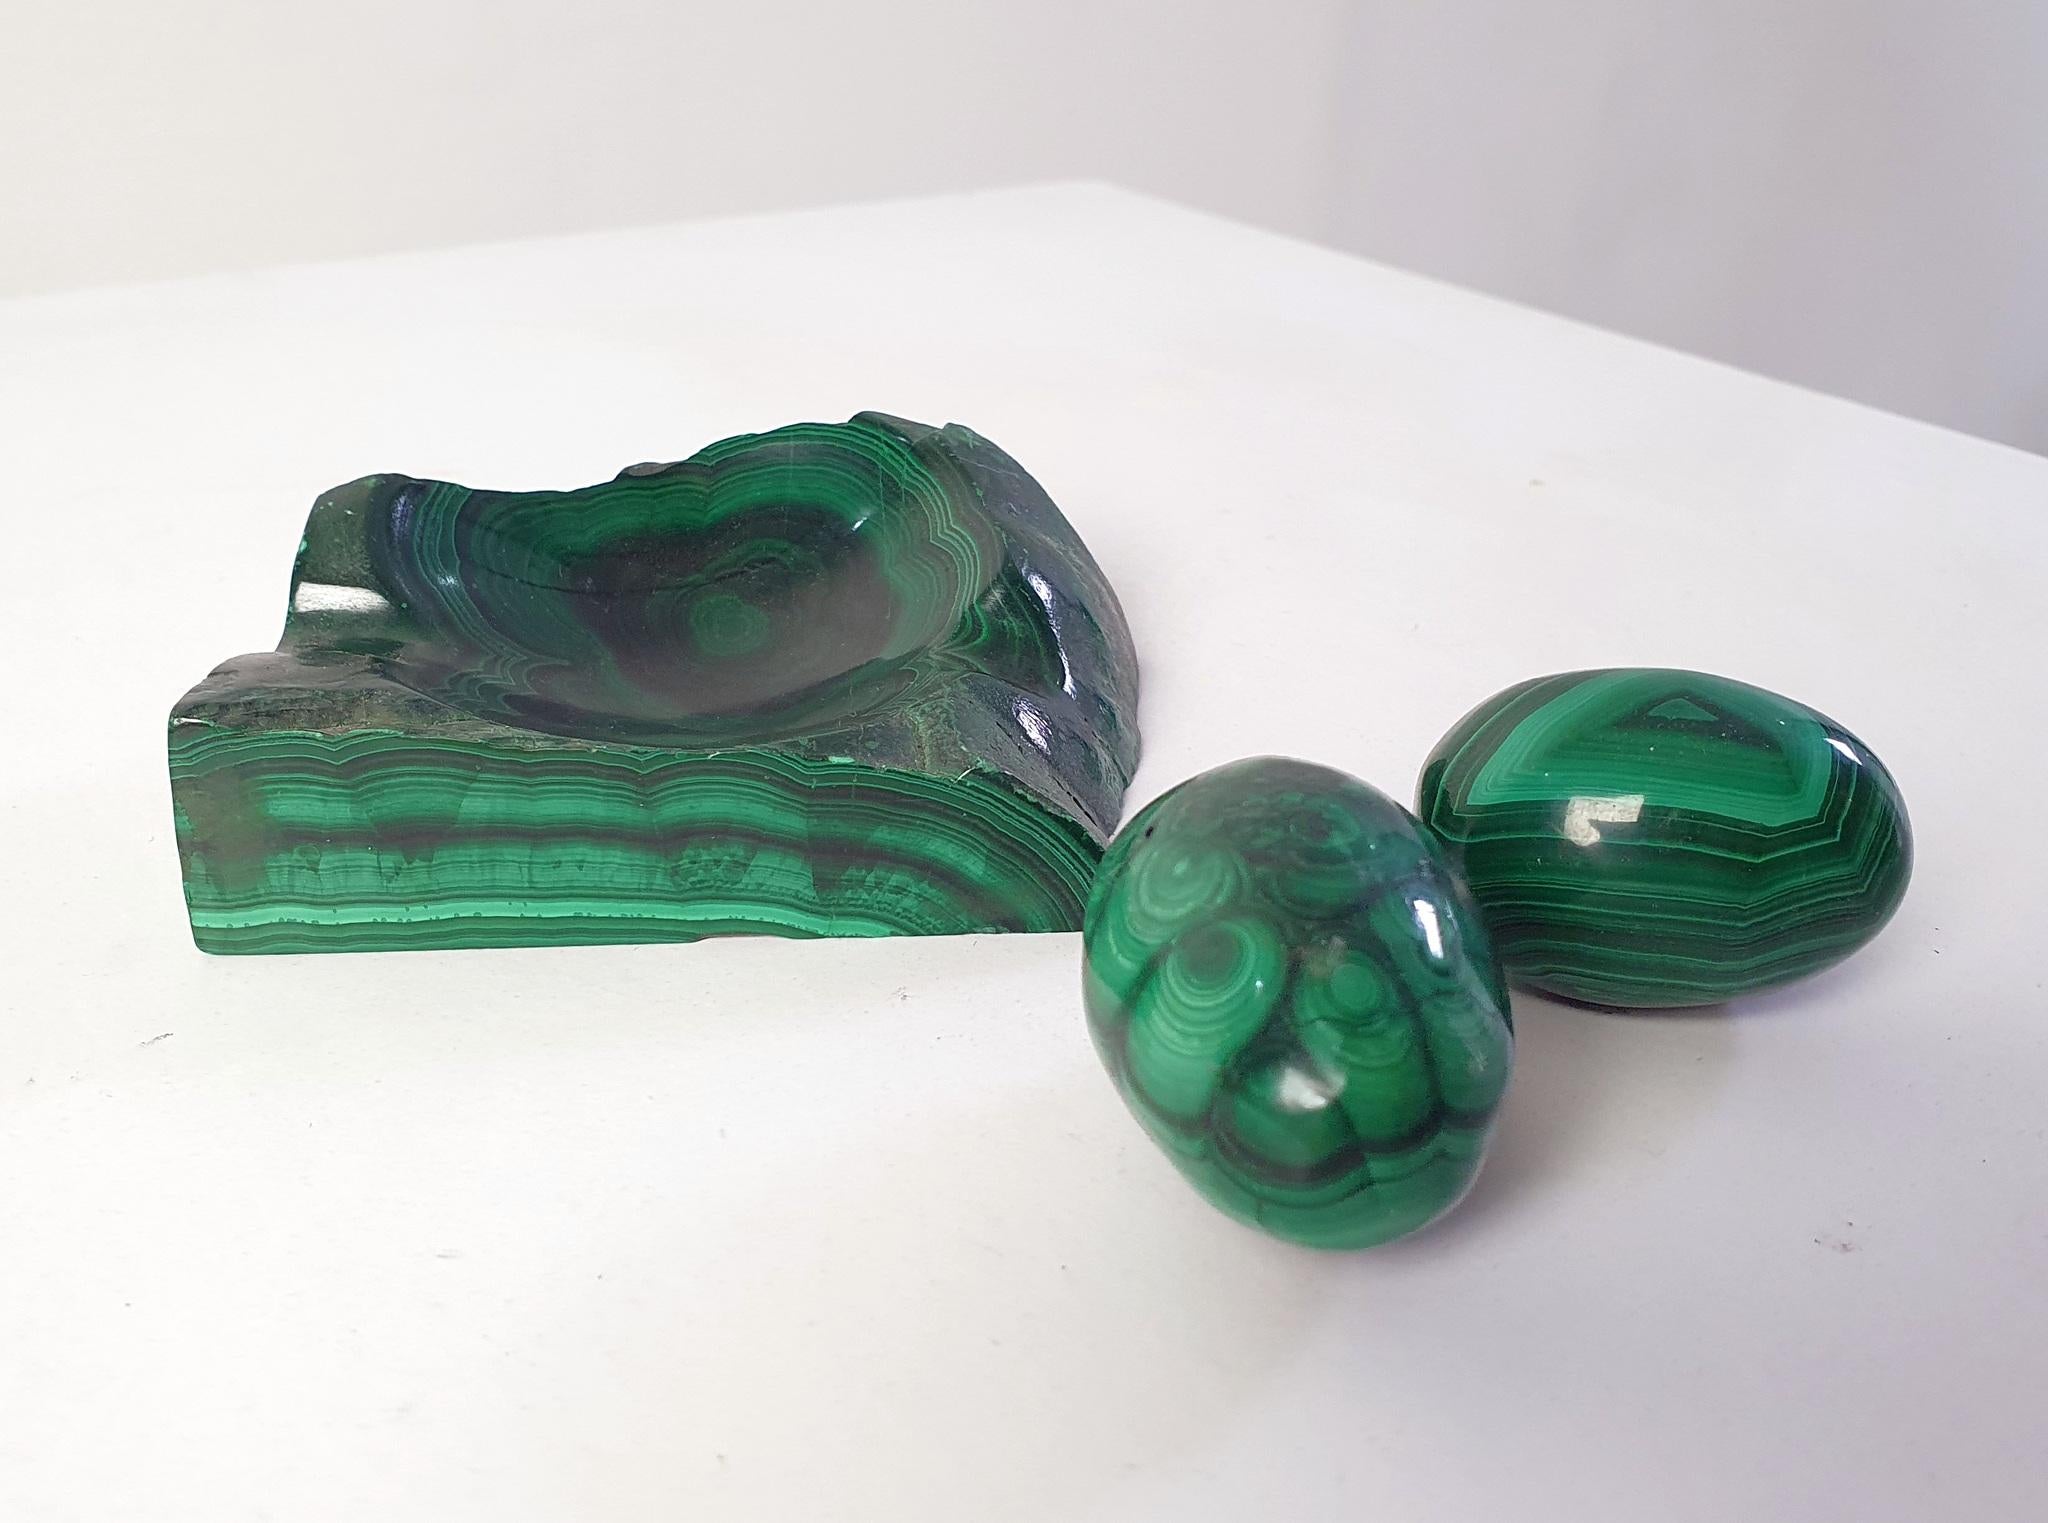 A set consisting of one natural solid vide poche (10x7x3 cm) of malachite with an organic shape as well as a pair of eggs which are solid too. The measurements of the eggs are 5x3,5 cm.